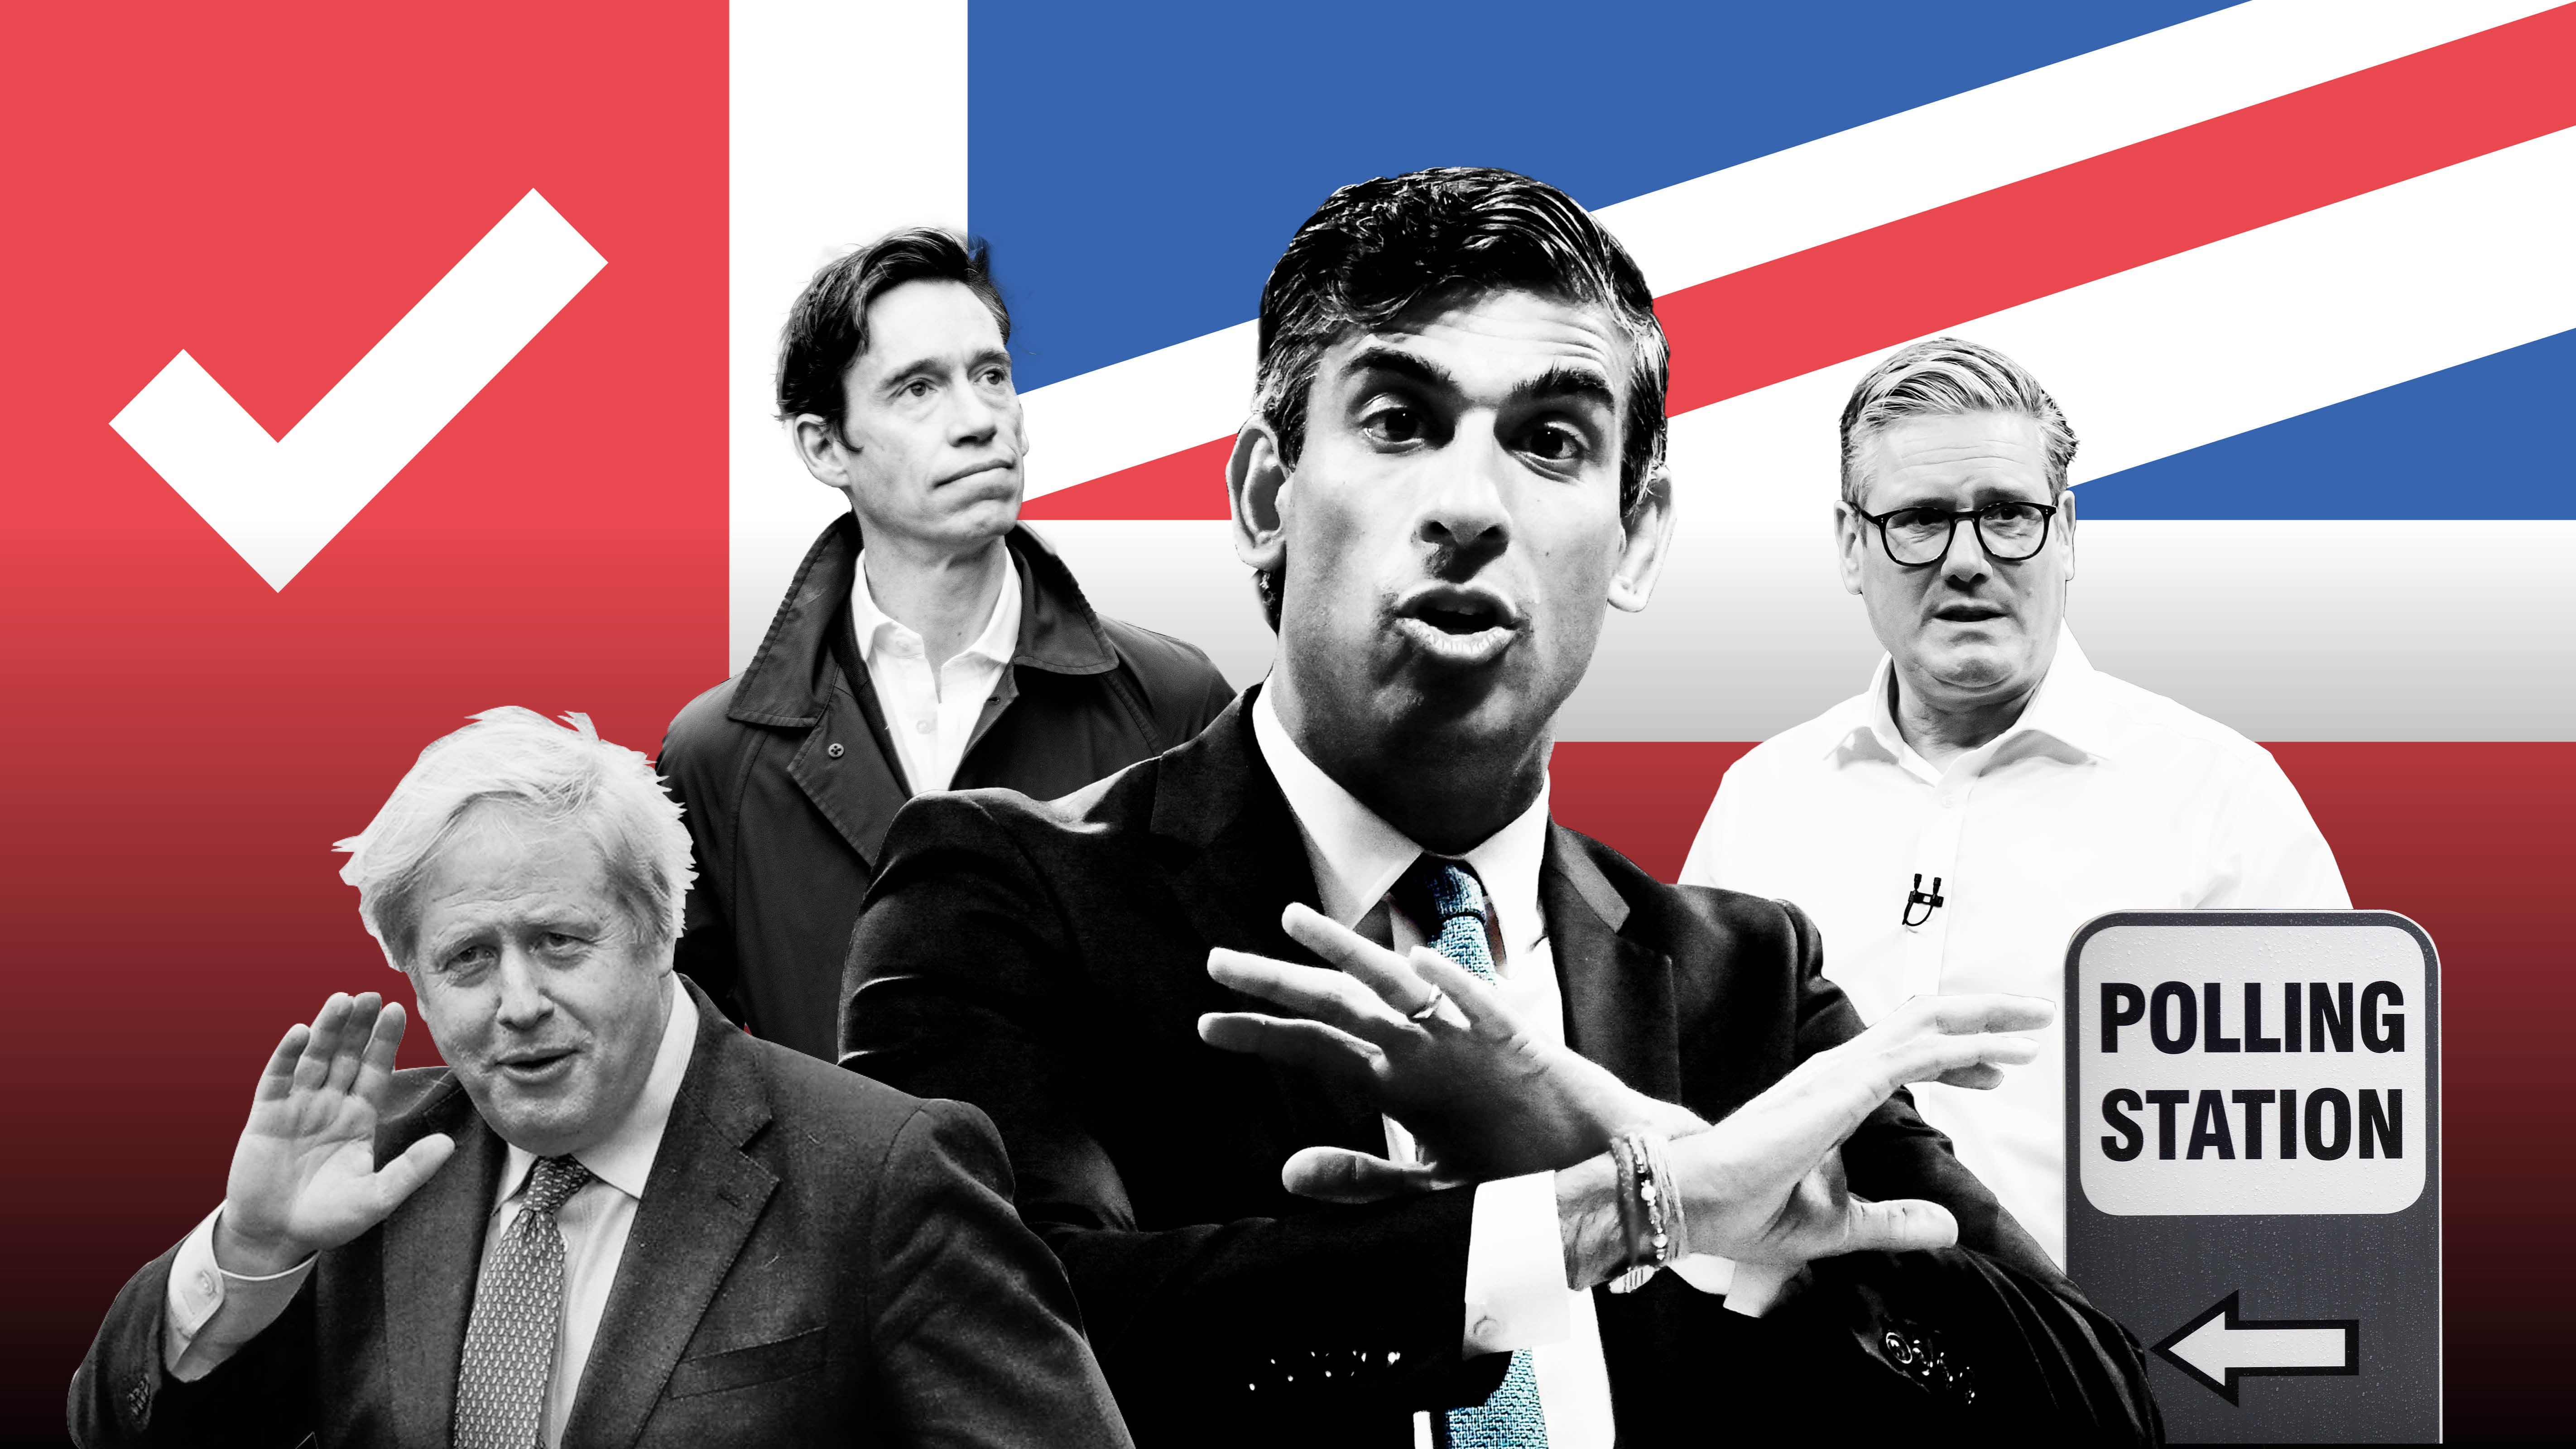 Photographs of Boris Johnson, Rory Stewart, Rishi Sunak and Keir Starmer against a background of the union jack and a large tick